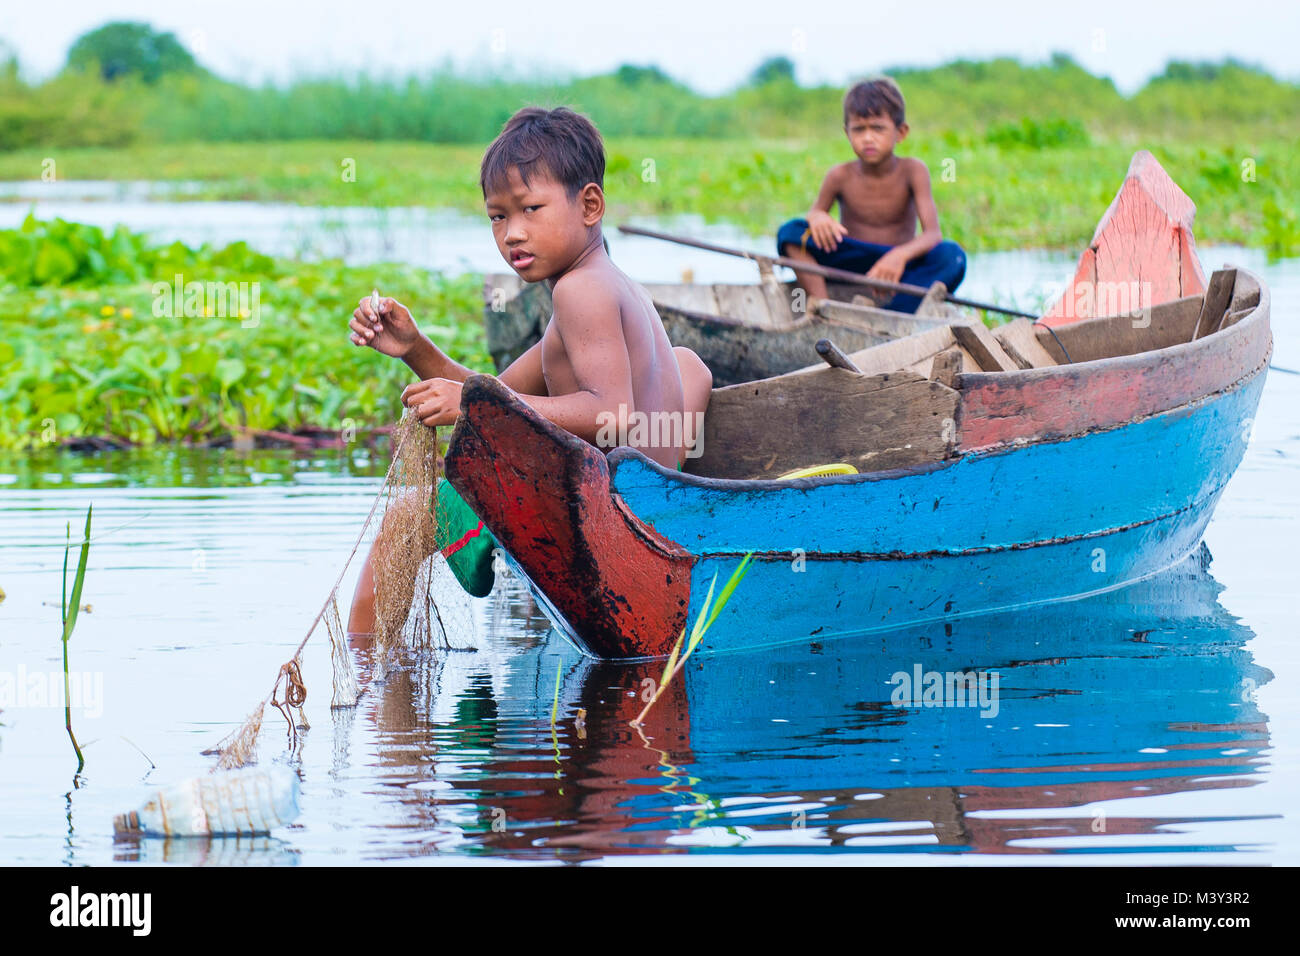 Child in Tonle Sap, Cambodia Stock Image - Image of stand, youth